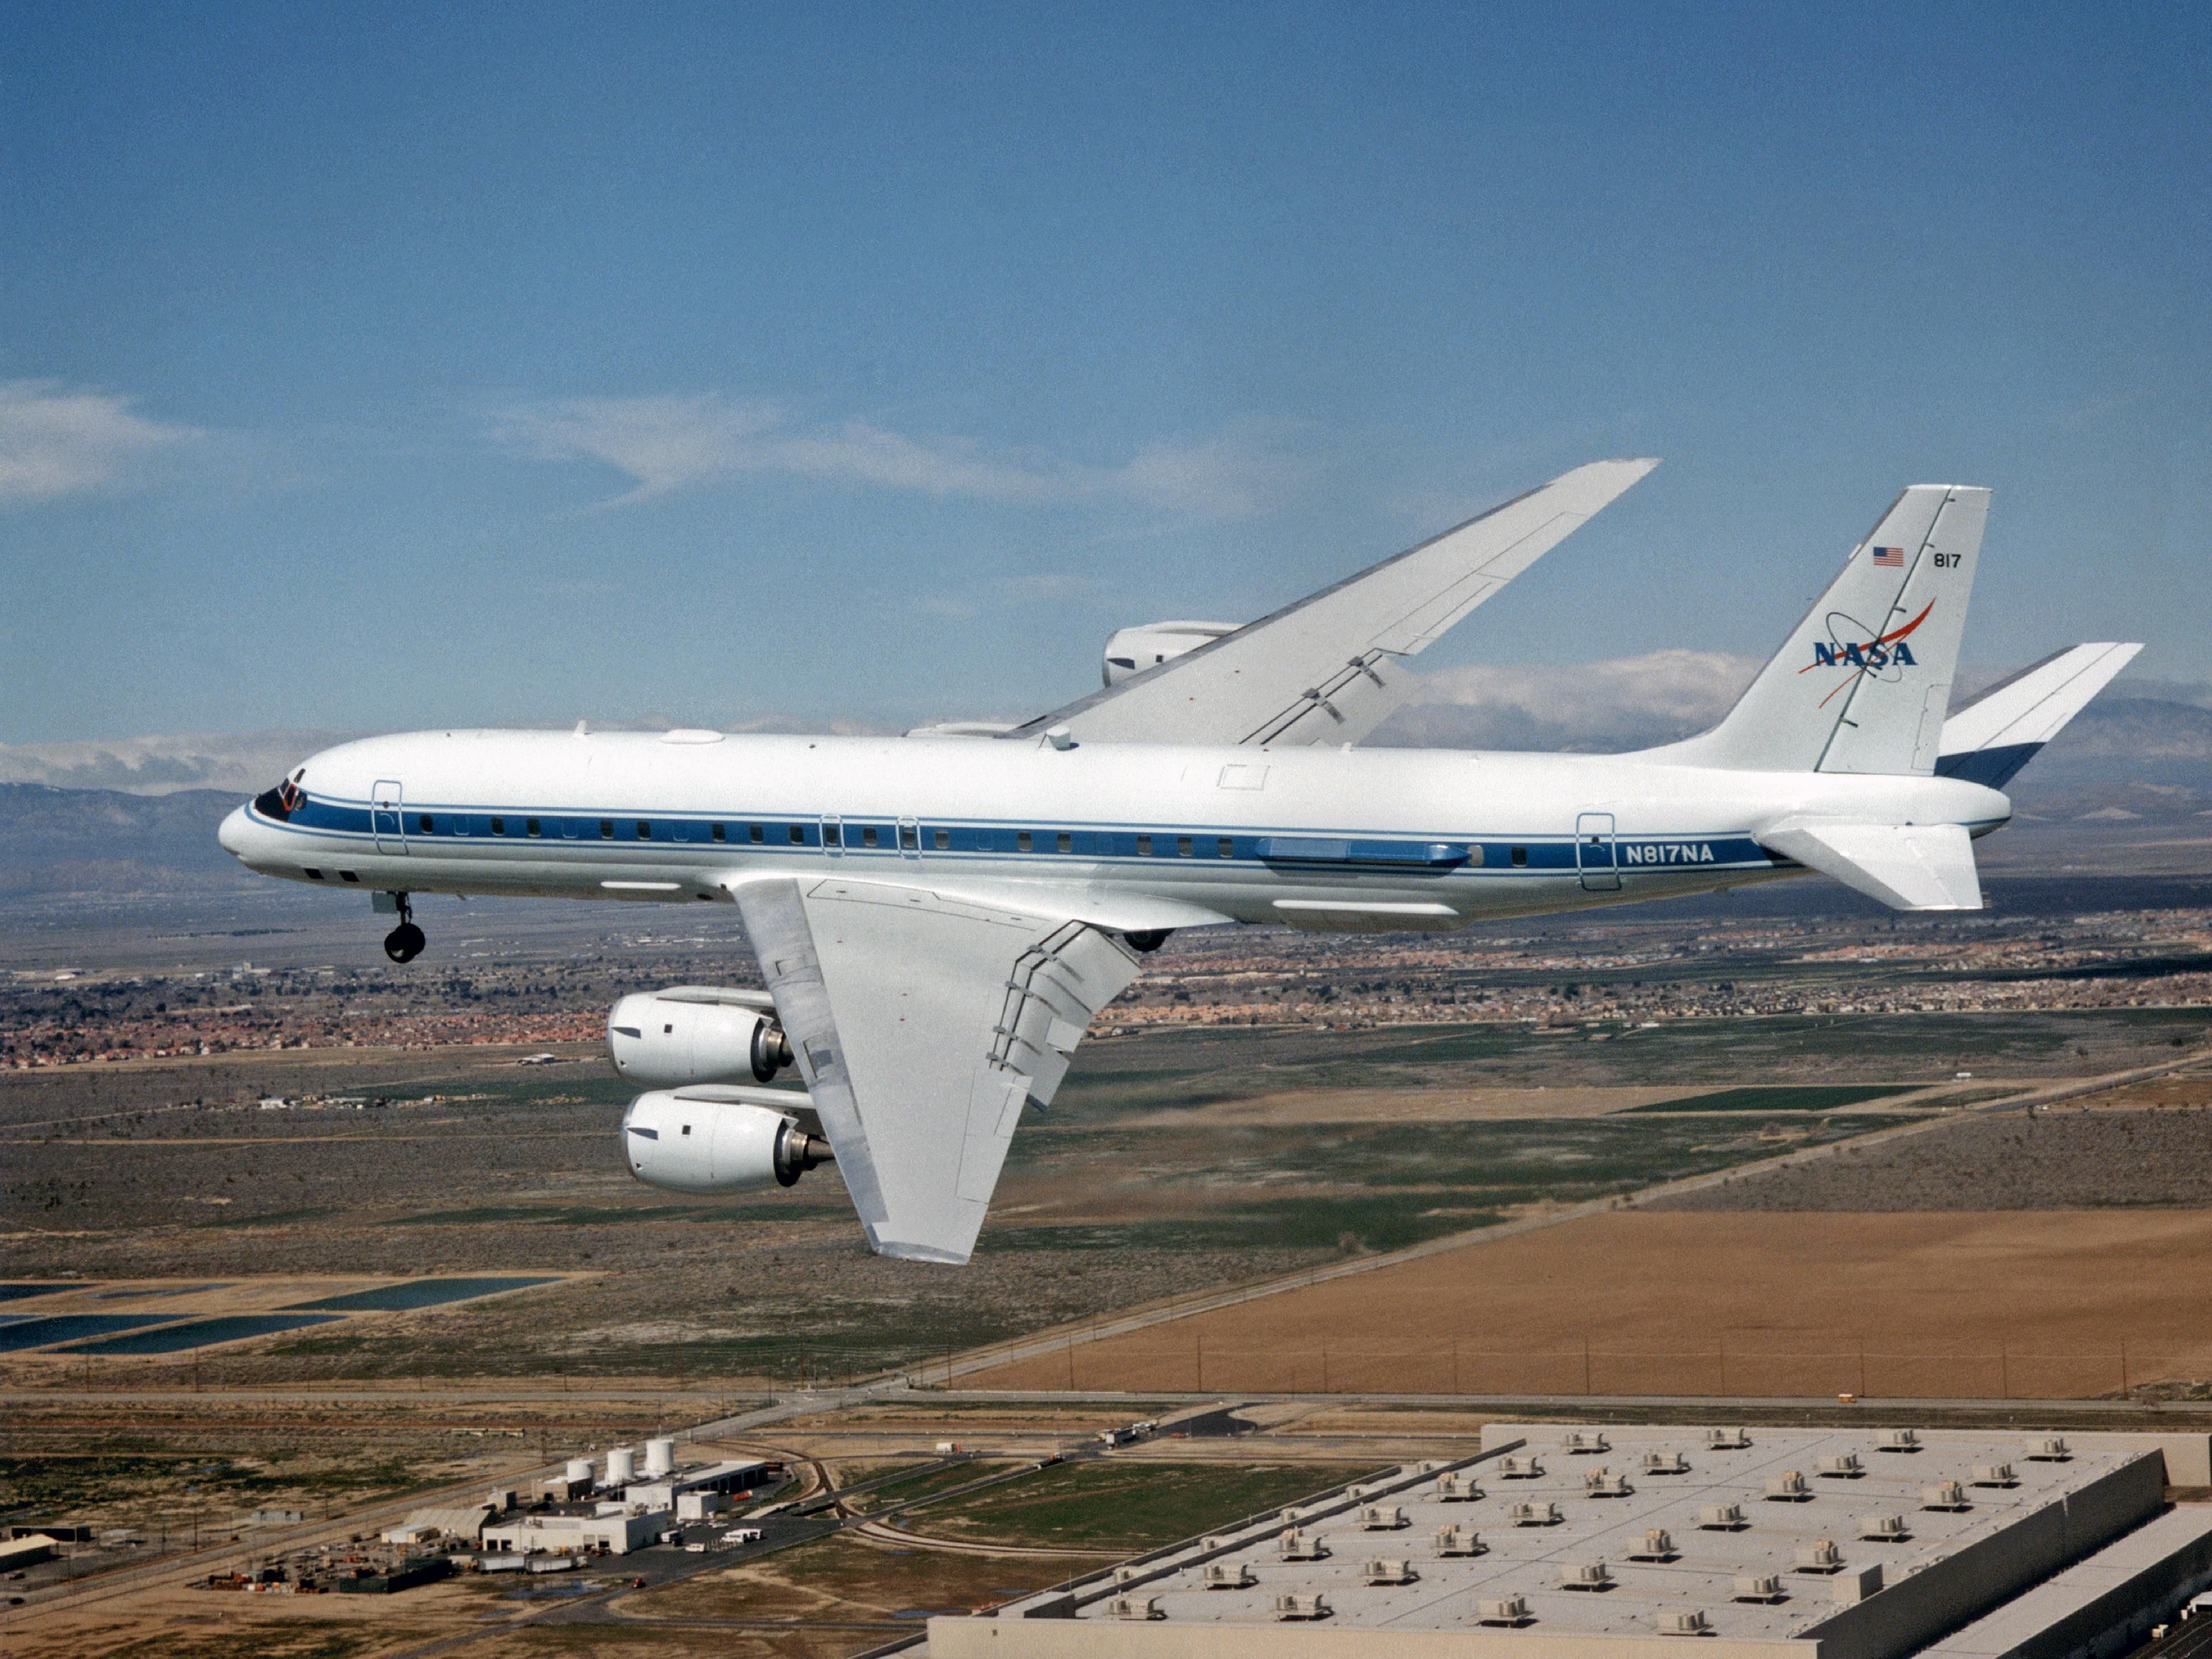 NASA's McDonnell Douglas DC-8 Airborne Laboratory Flying in the sky.